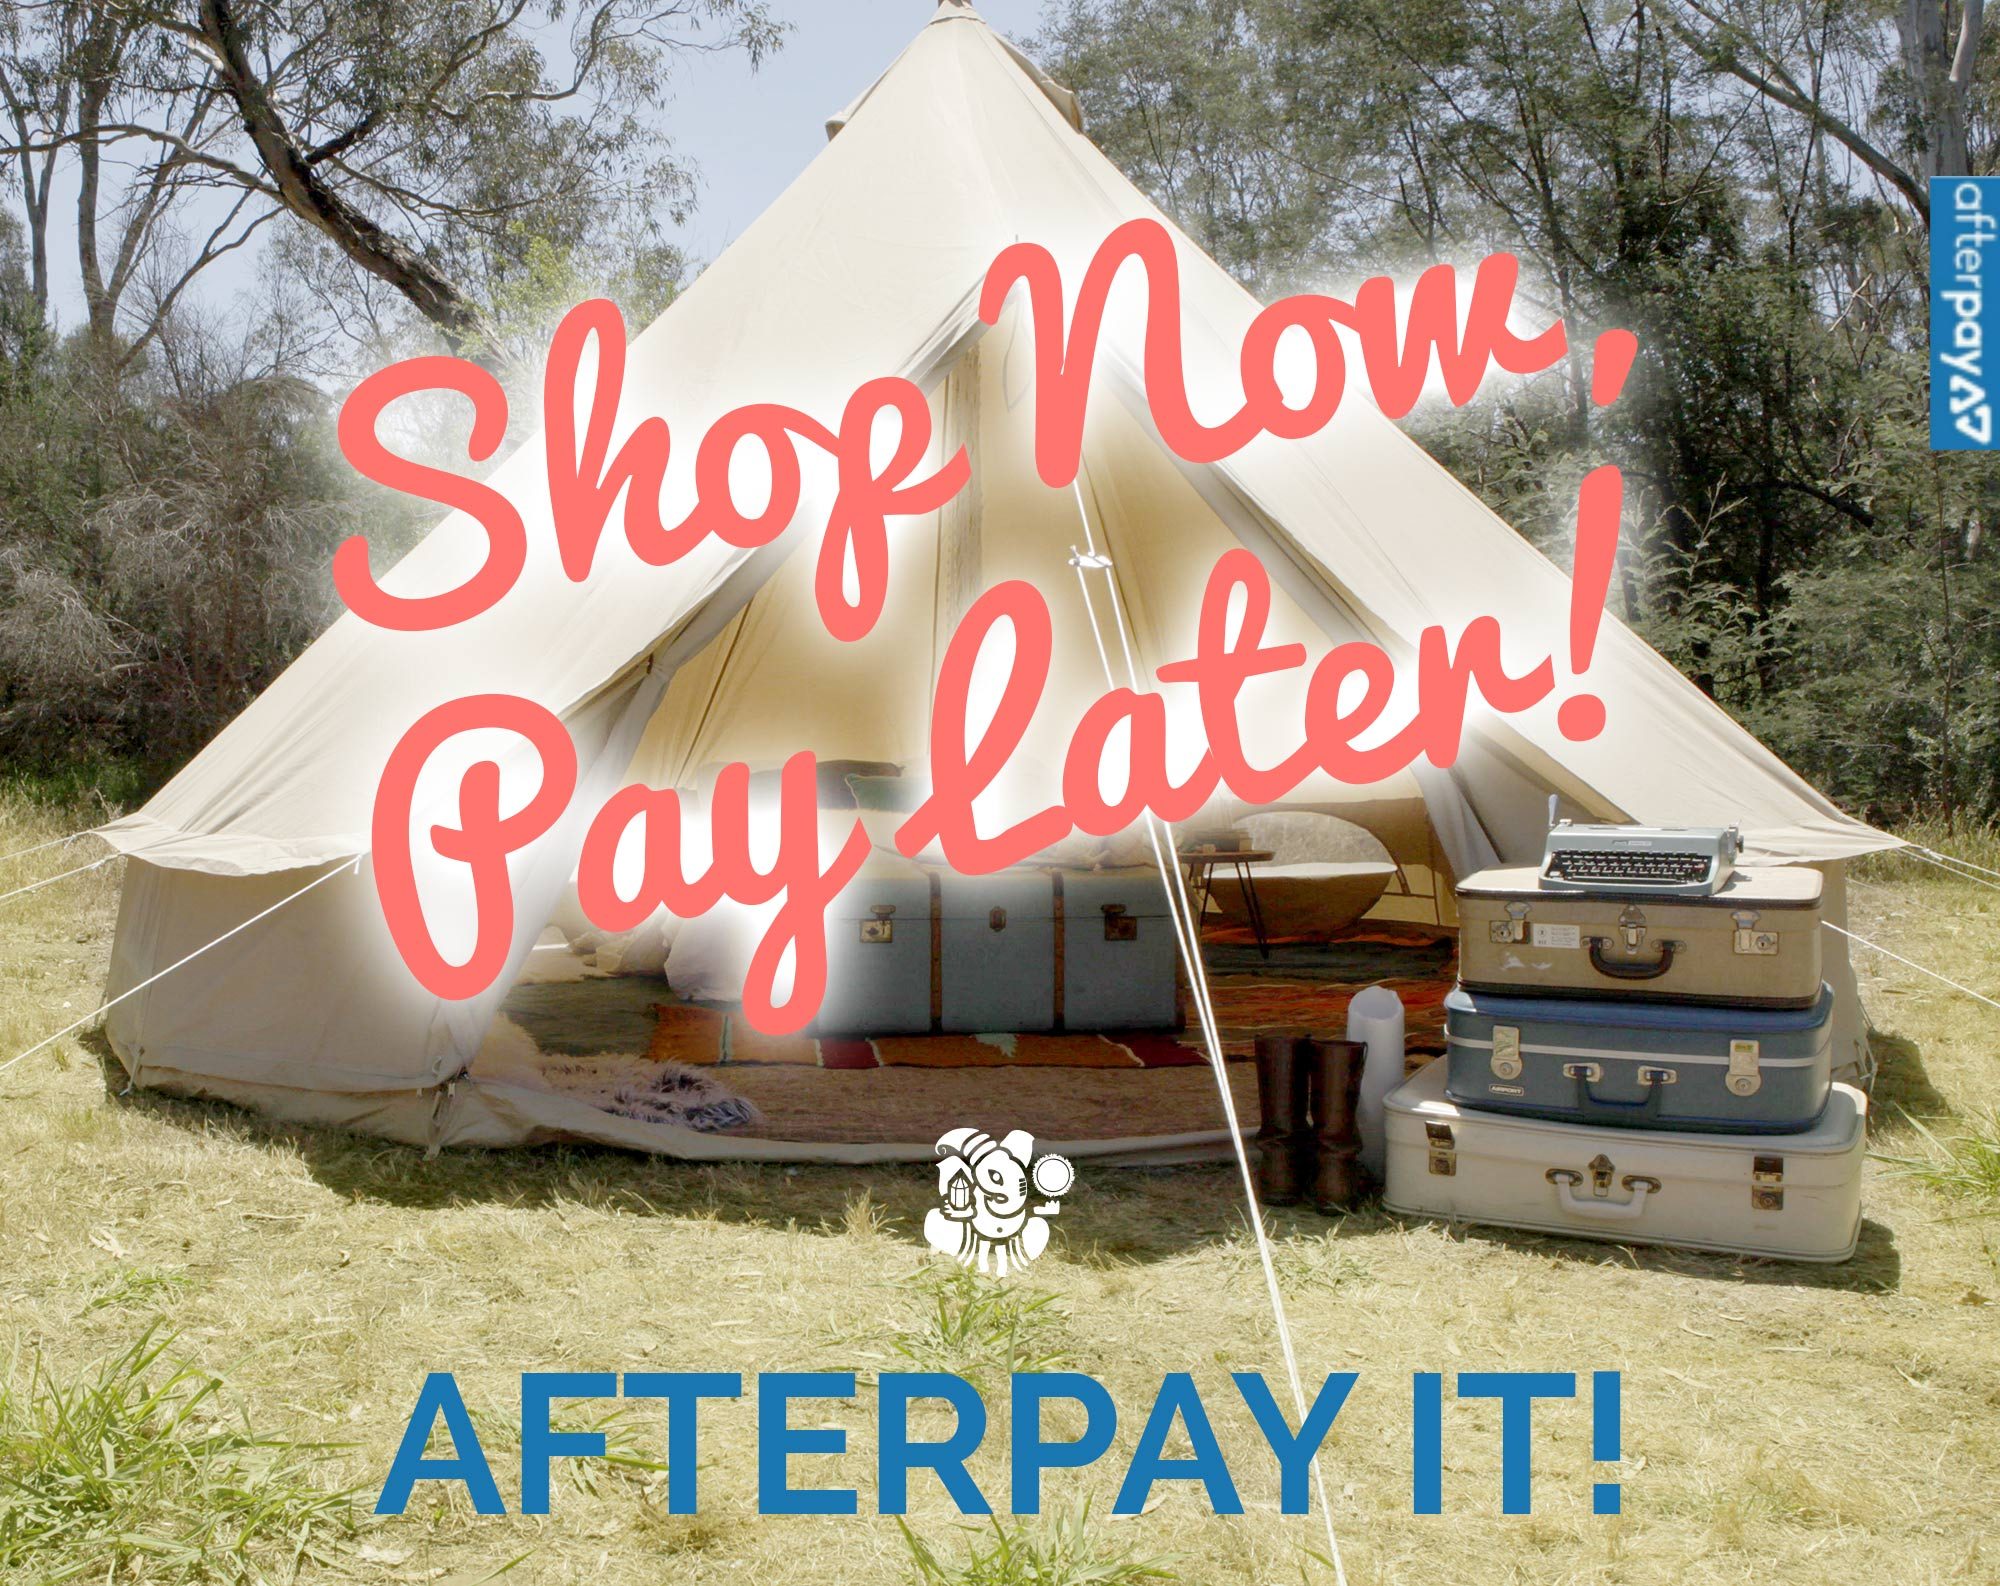 Afterpay - shop now, pay later